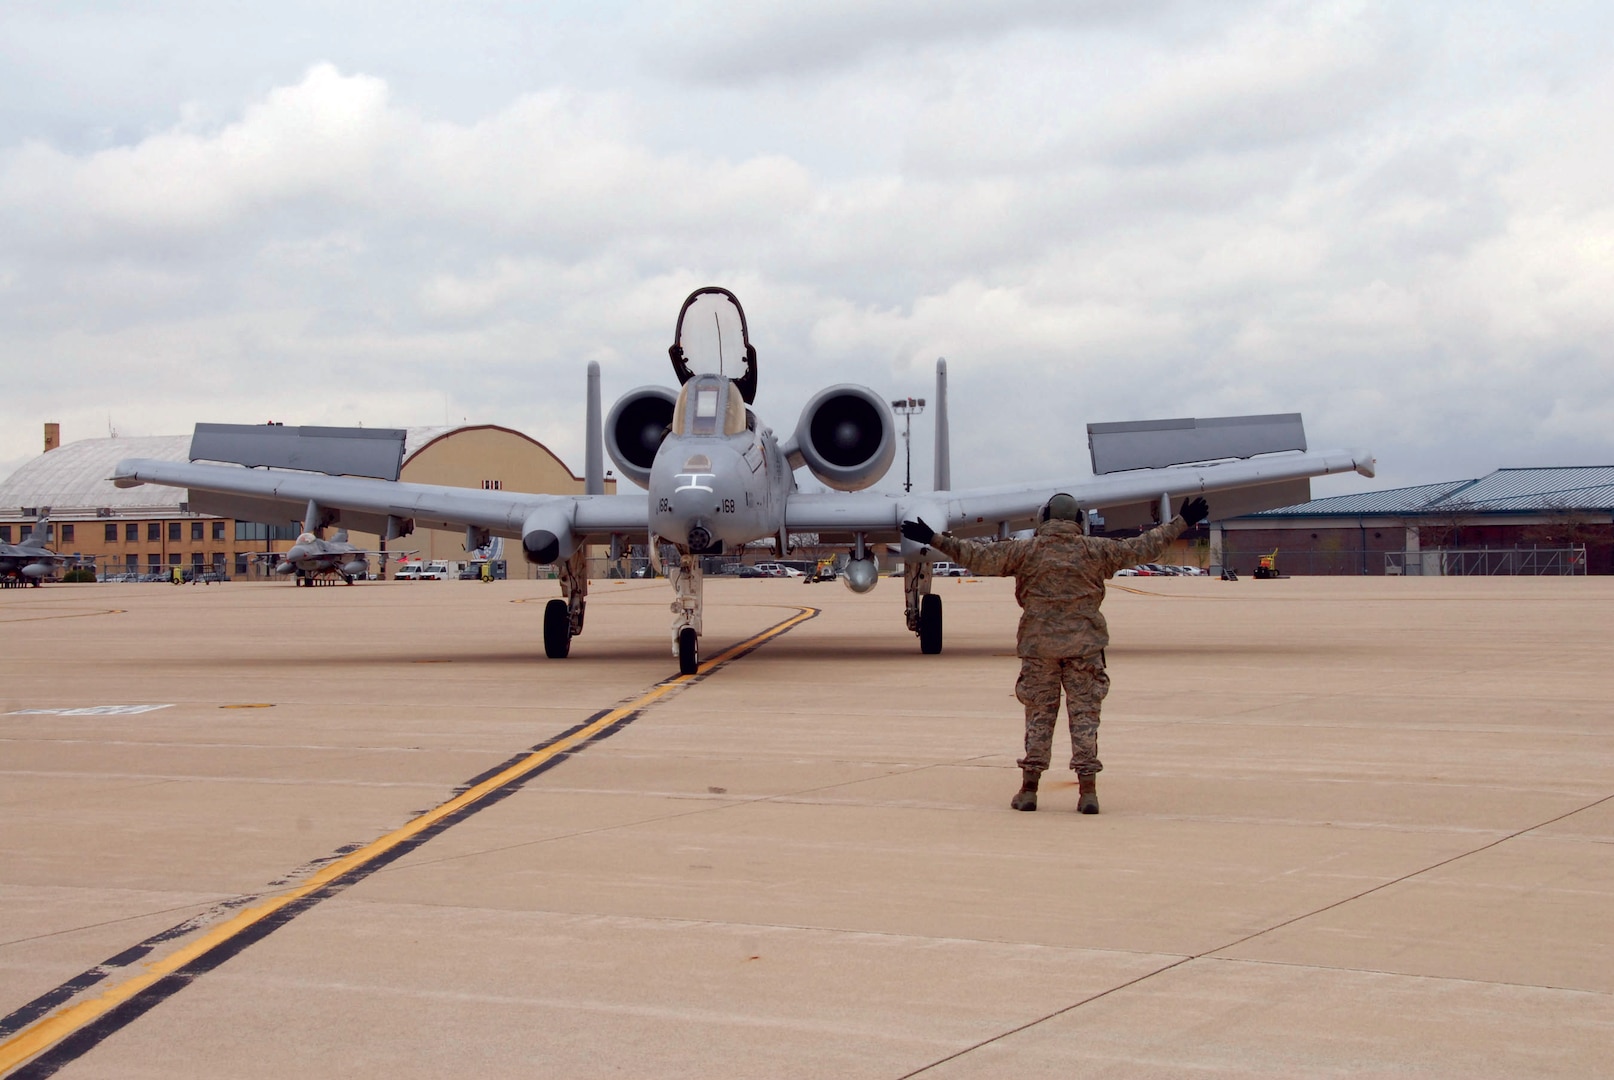 The first A-10 Warthog training aircraft recently arrived at the Indiana Air National Guard's 122nd Fighter Wing in Fort Wayne. The unit is converting from the F-16 Fighting Falcon to the A-10 this year.